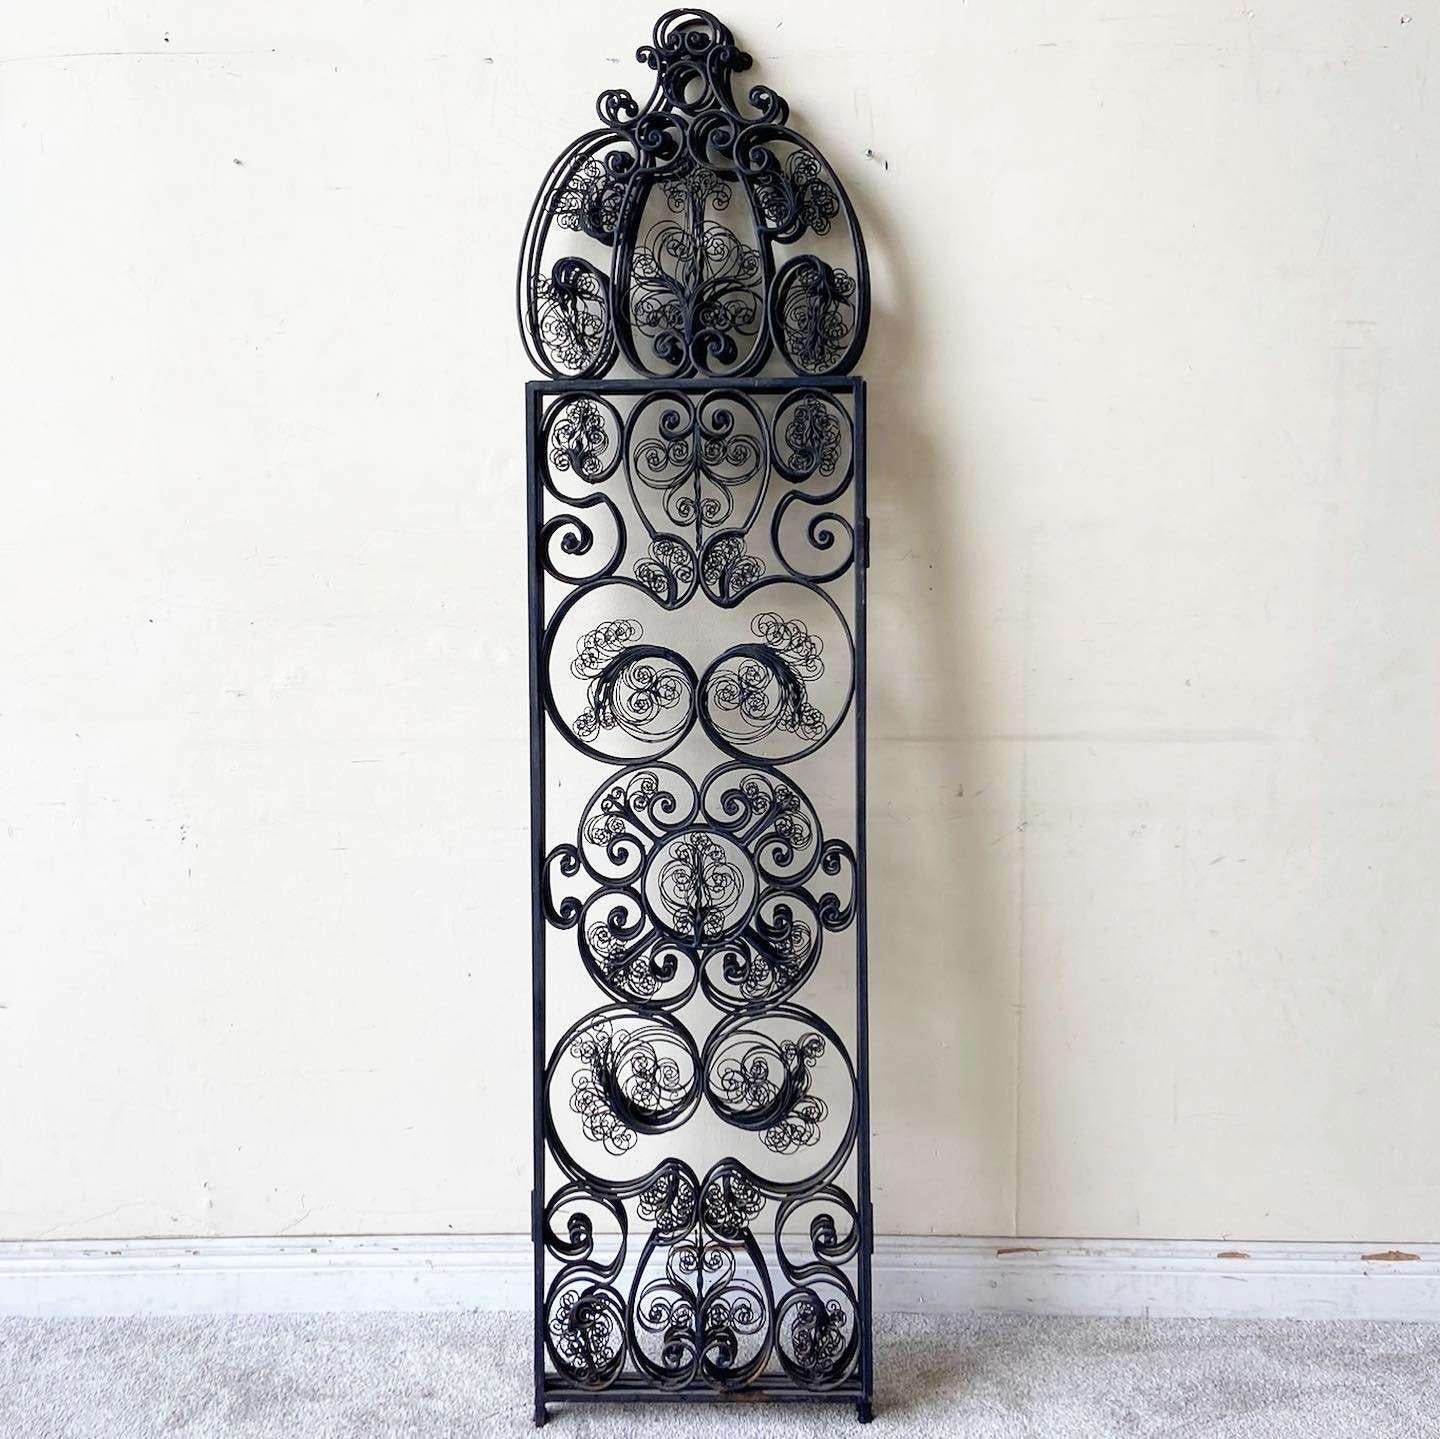 Antique Wrought Iron Room Divider - 4 Panels 2